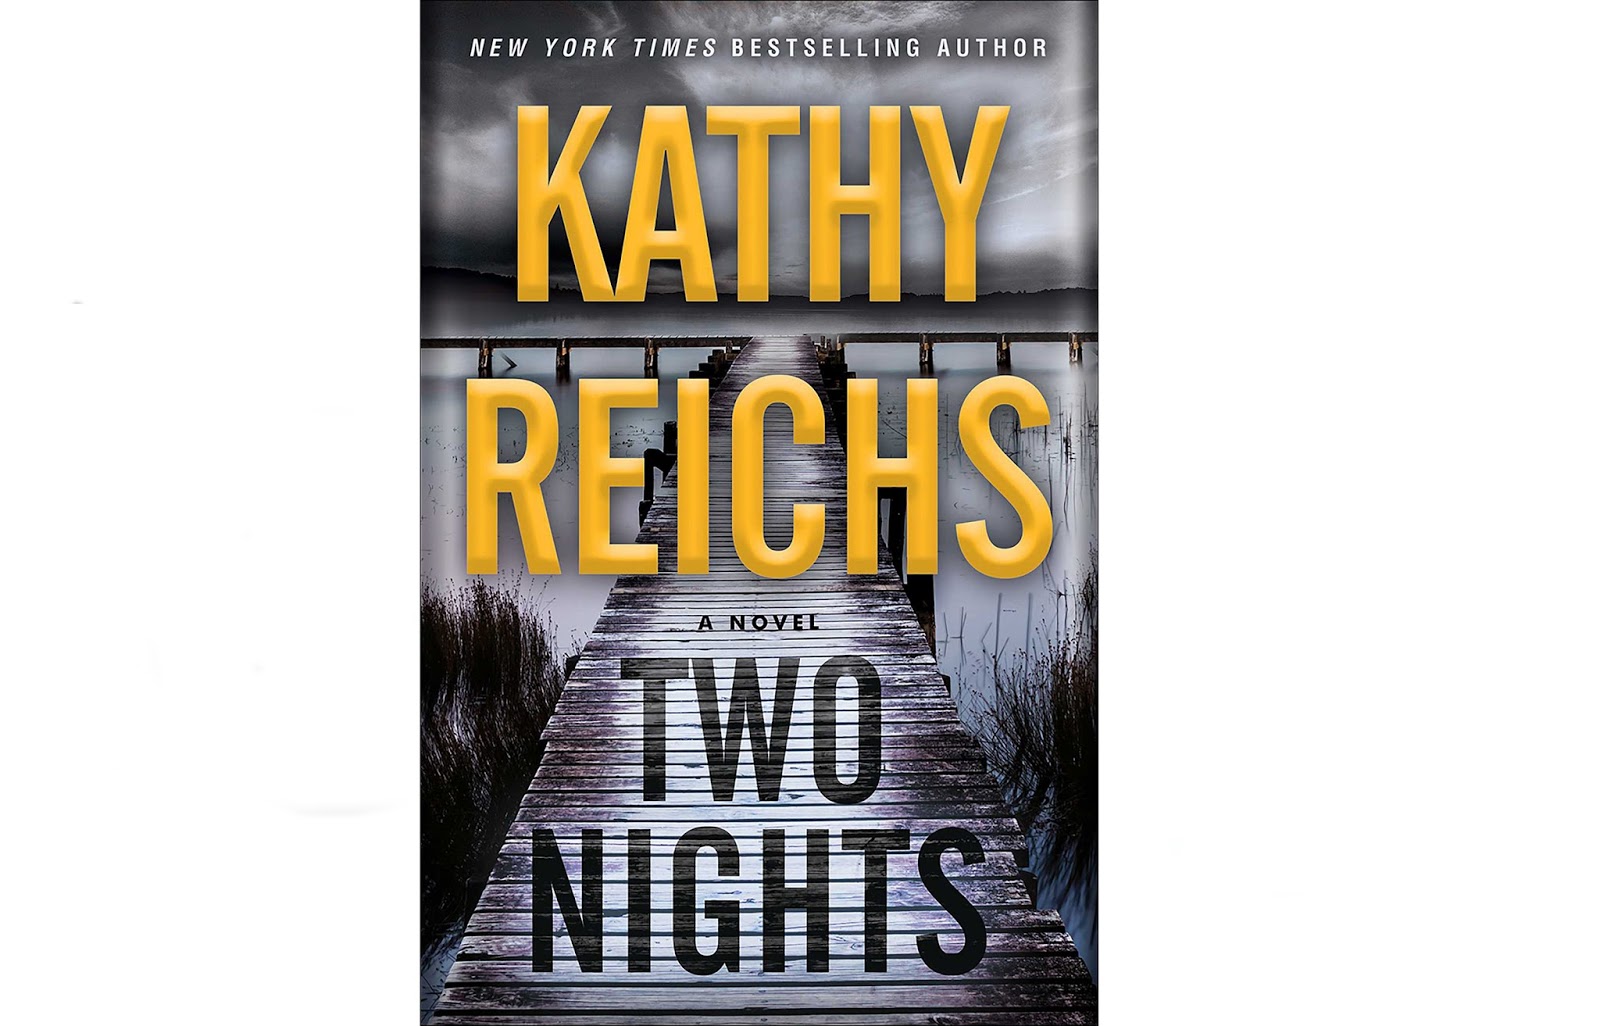  POINTS OF VIEW _______________ KATHY REICHS HER NEW BOOK "TWO NIGHTS"